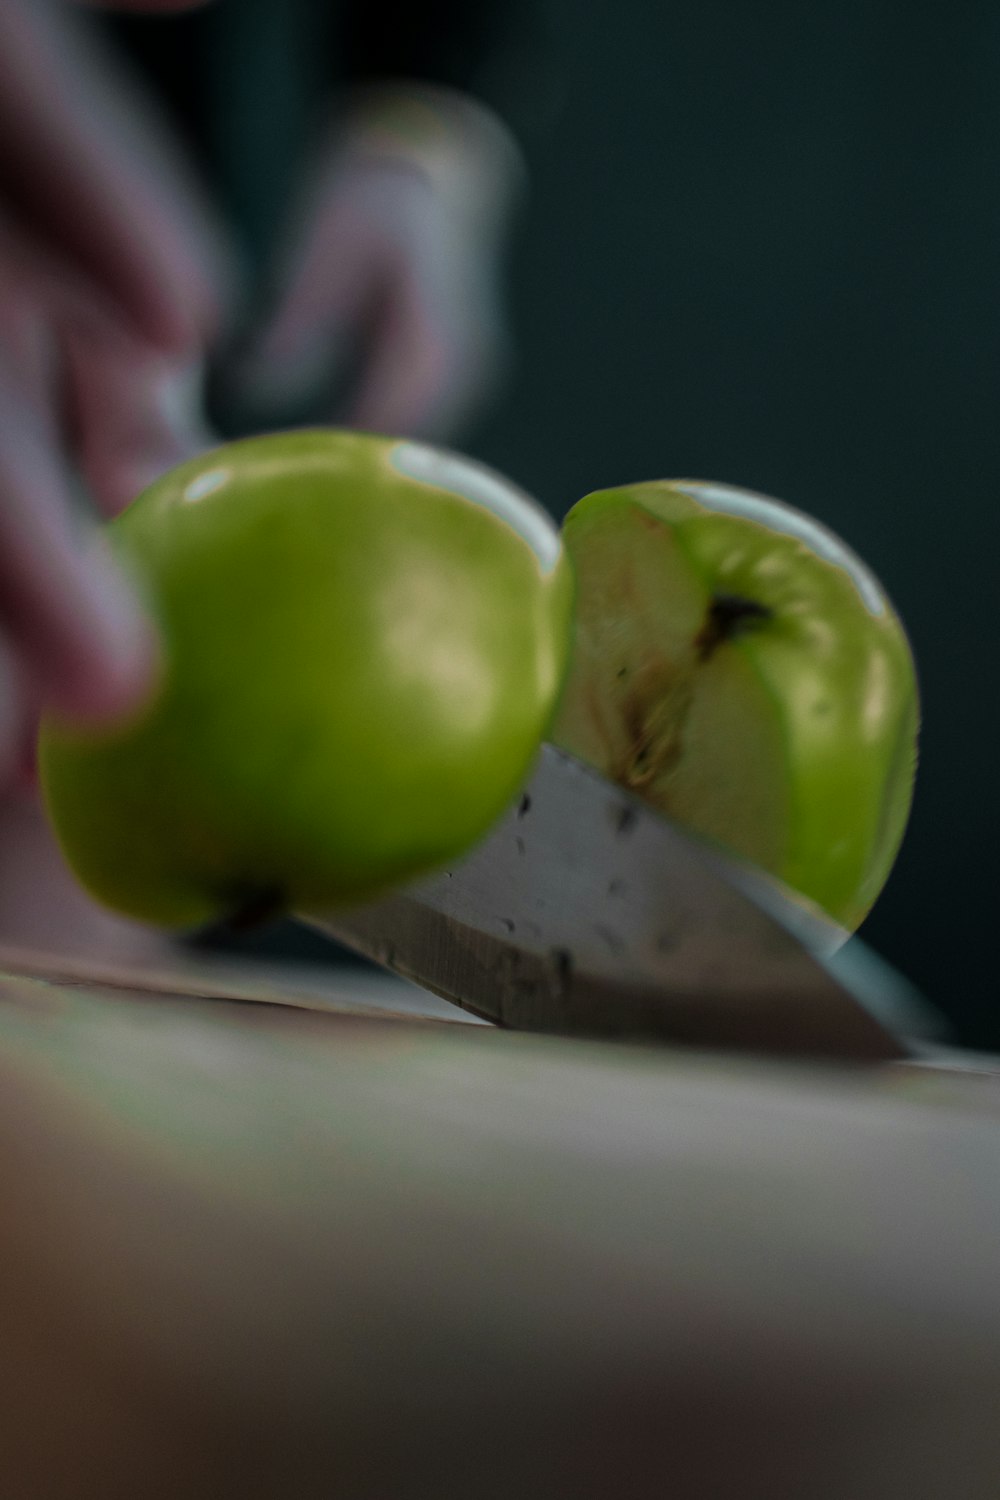 a person cutting an apple with a knife